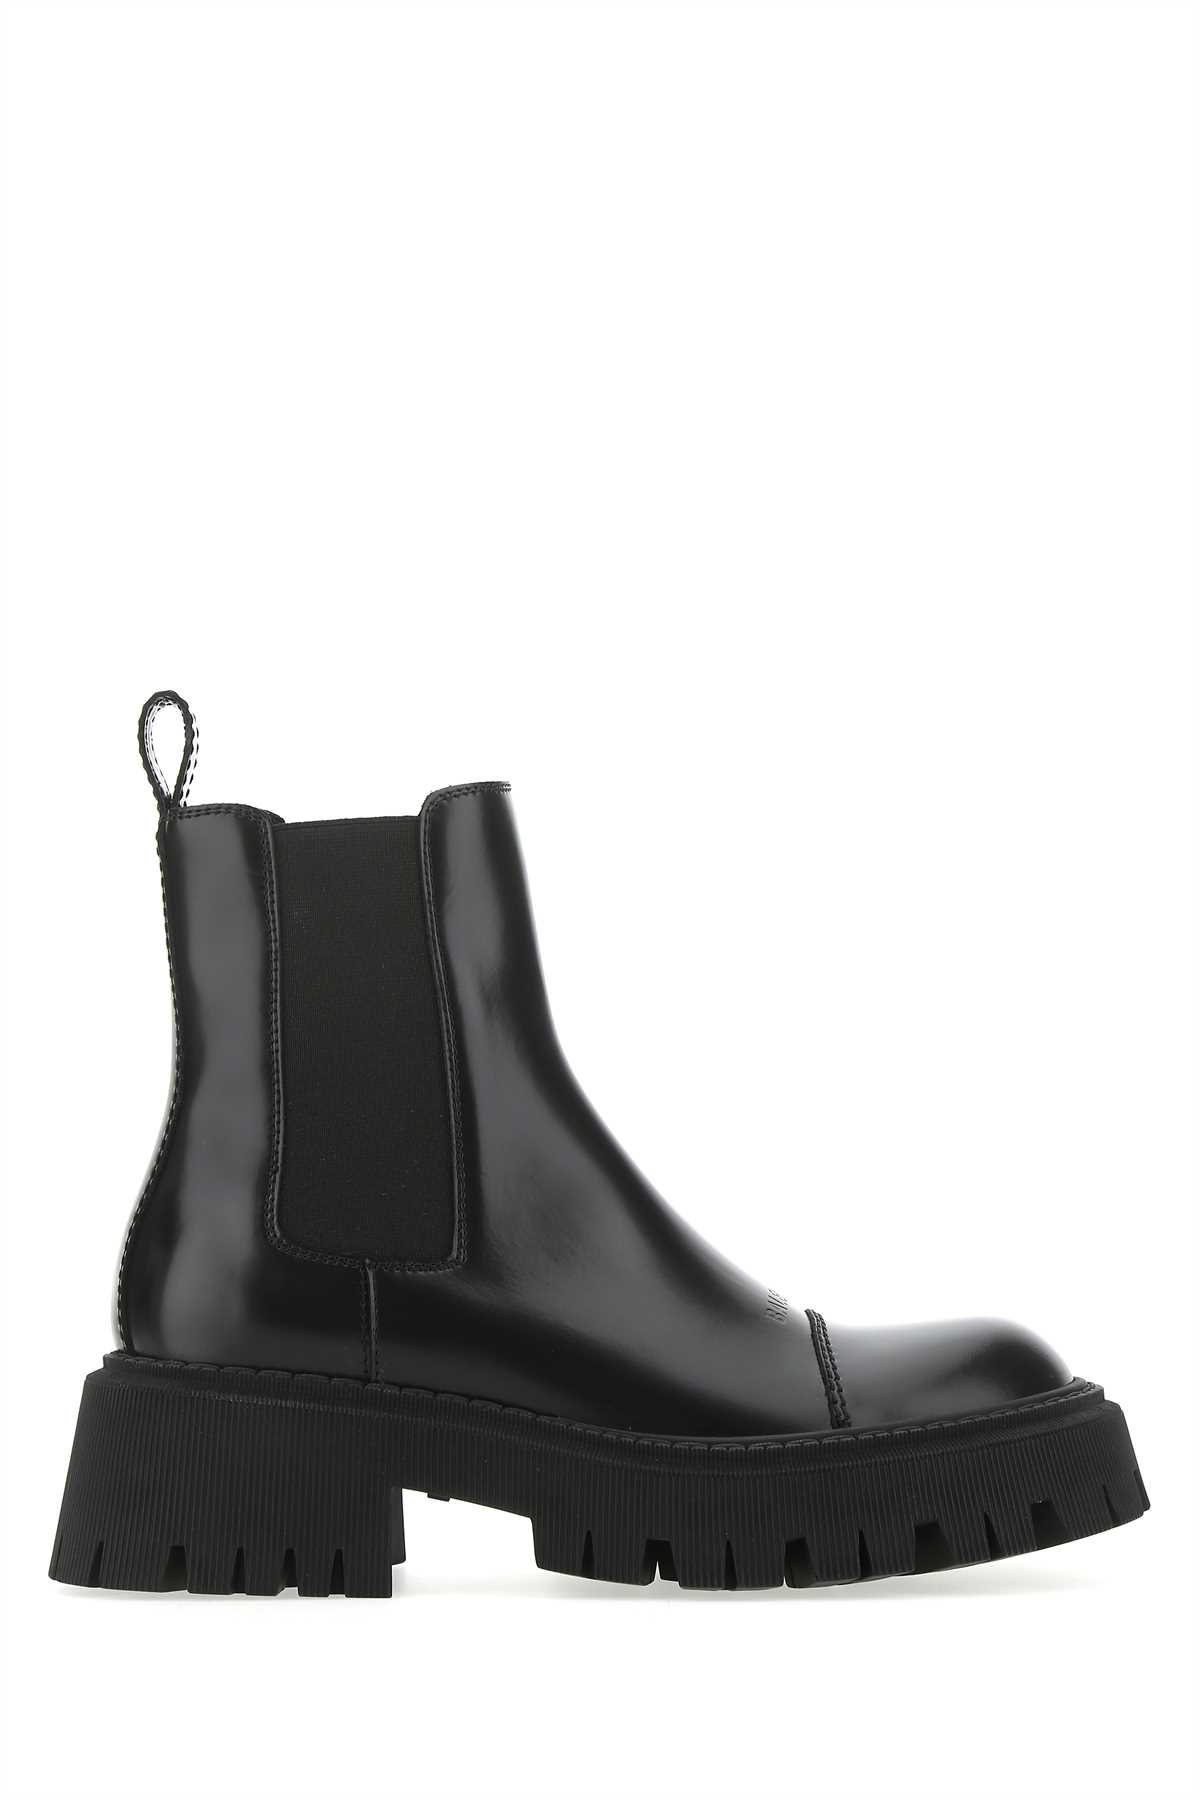 Shop Balenciaga Black Leather Tractor Ankle Boots